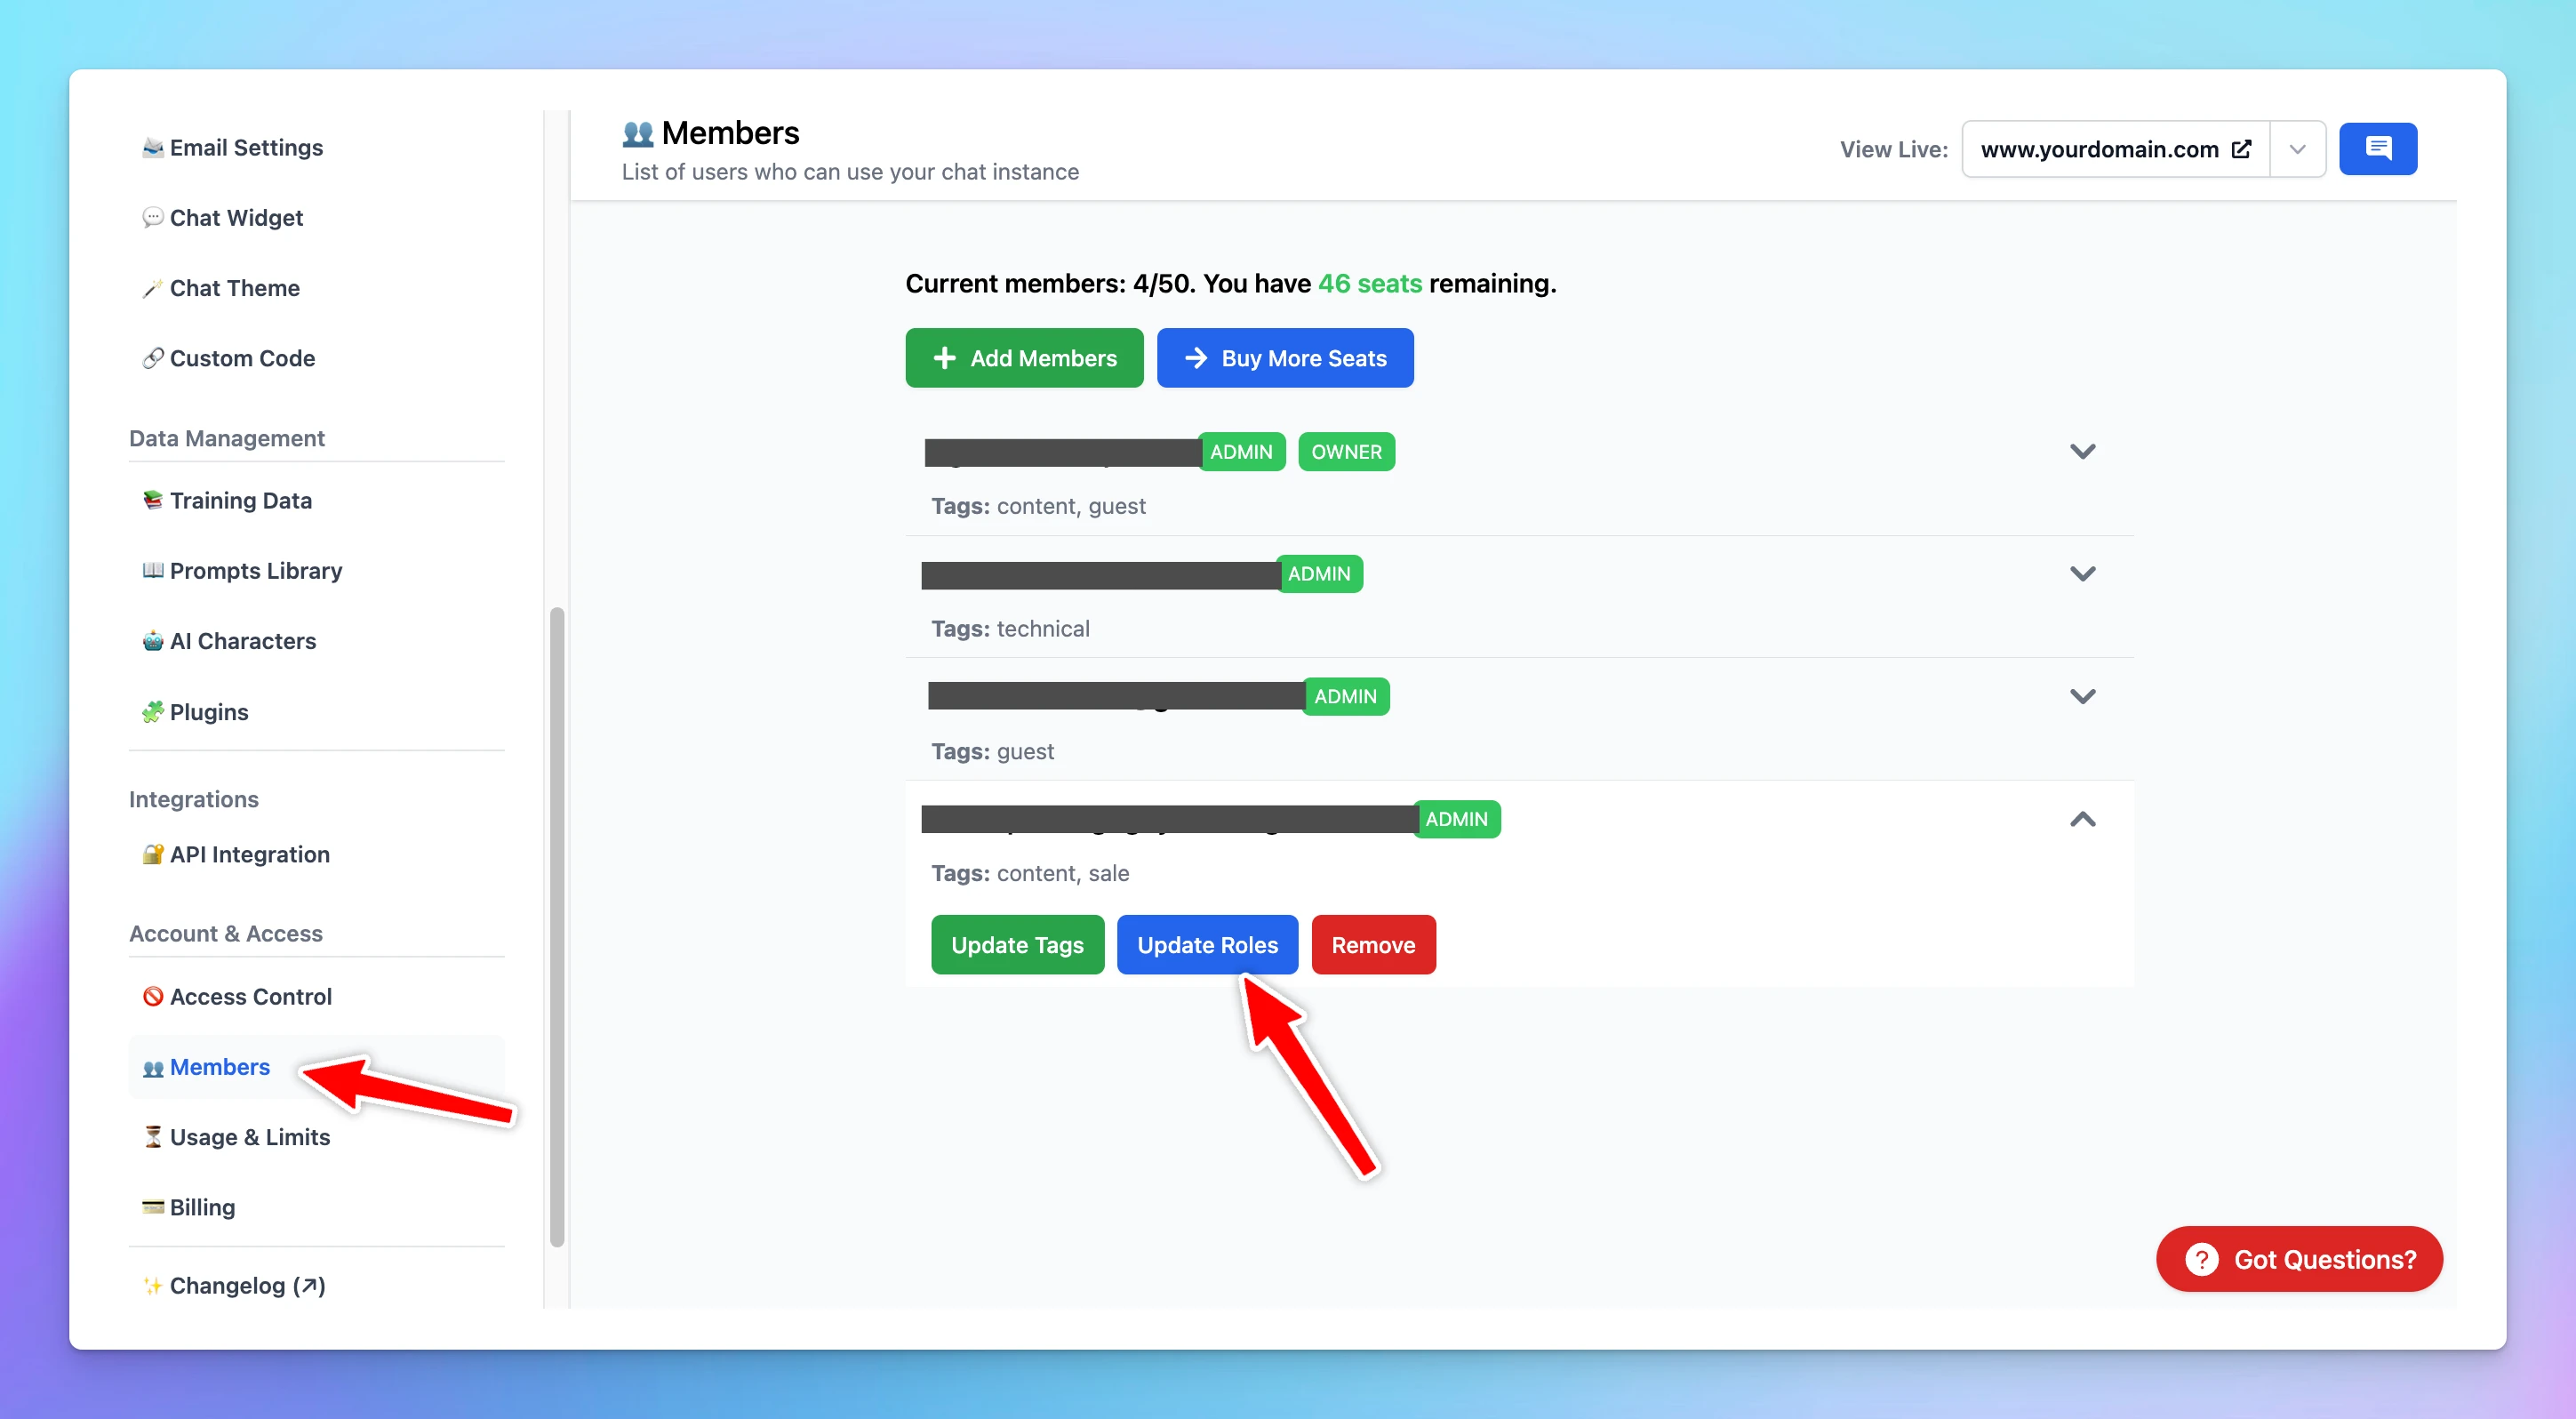 Managing seats and member roles in your chat instance